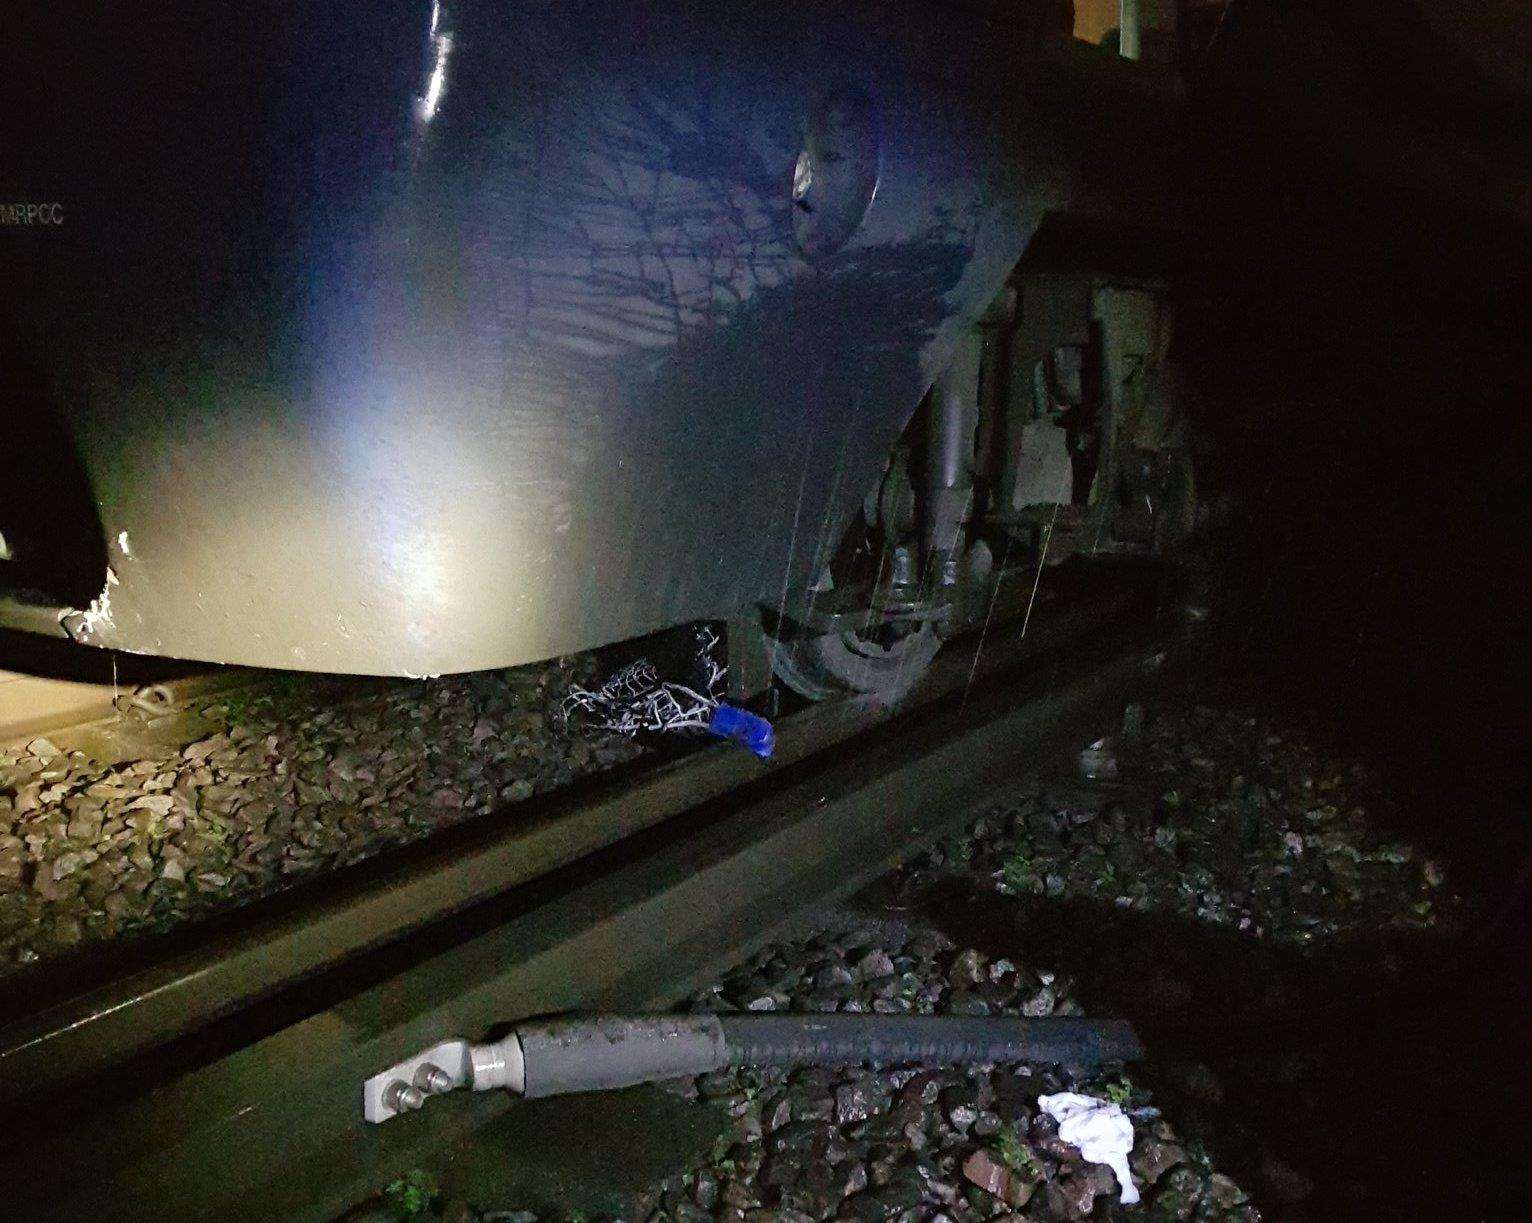 The train smashed the trolley in the collision. Picture: British Transport Police (7030540)